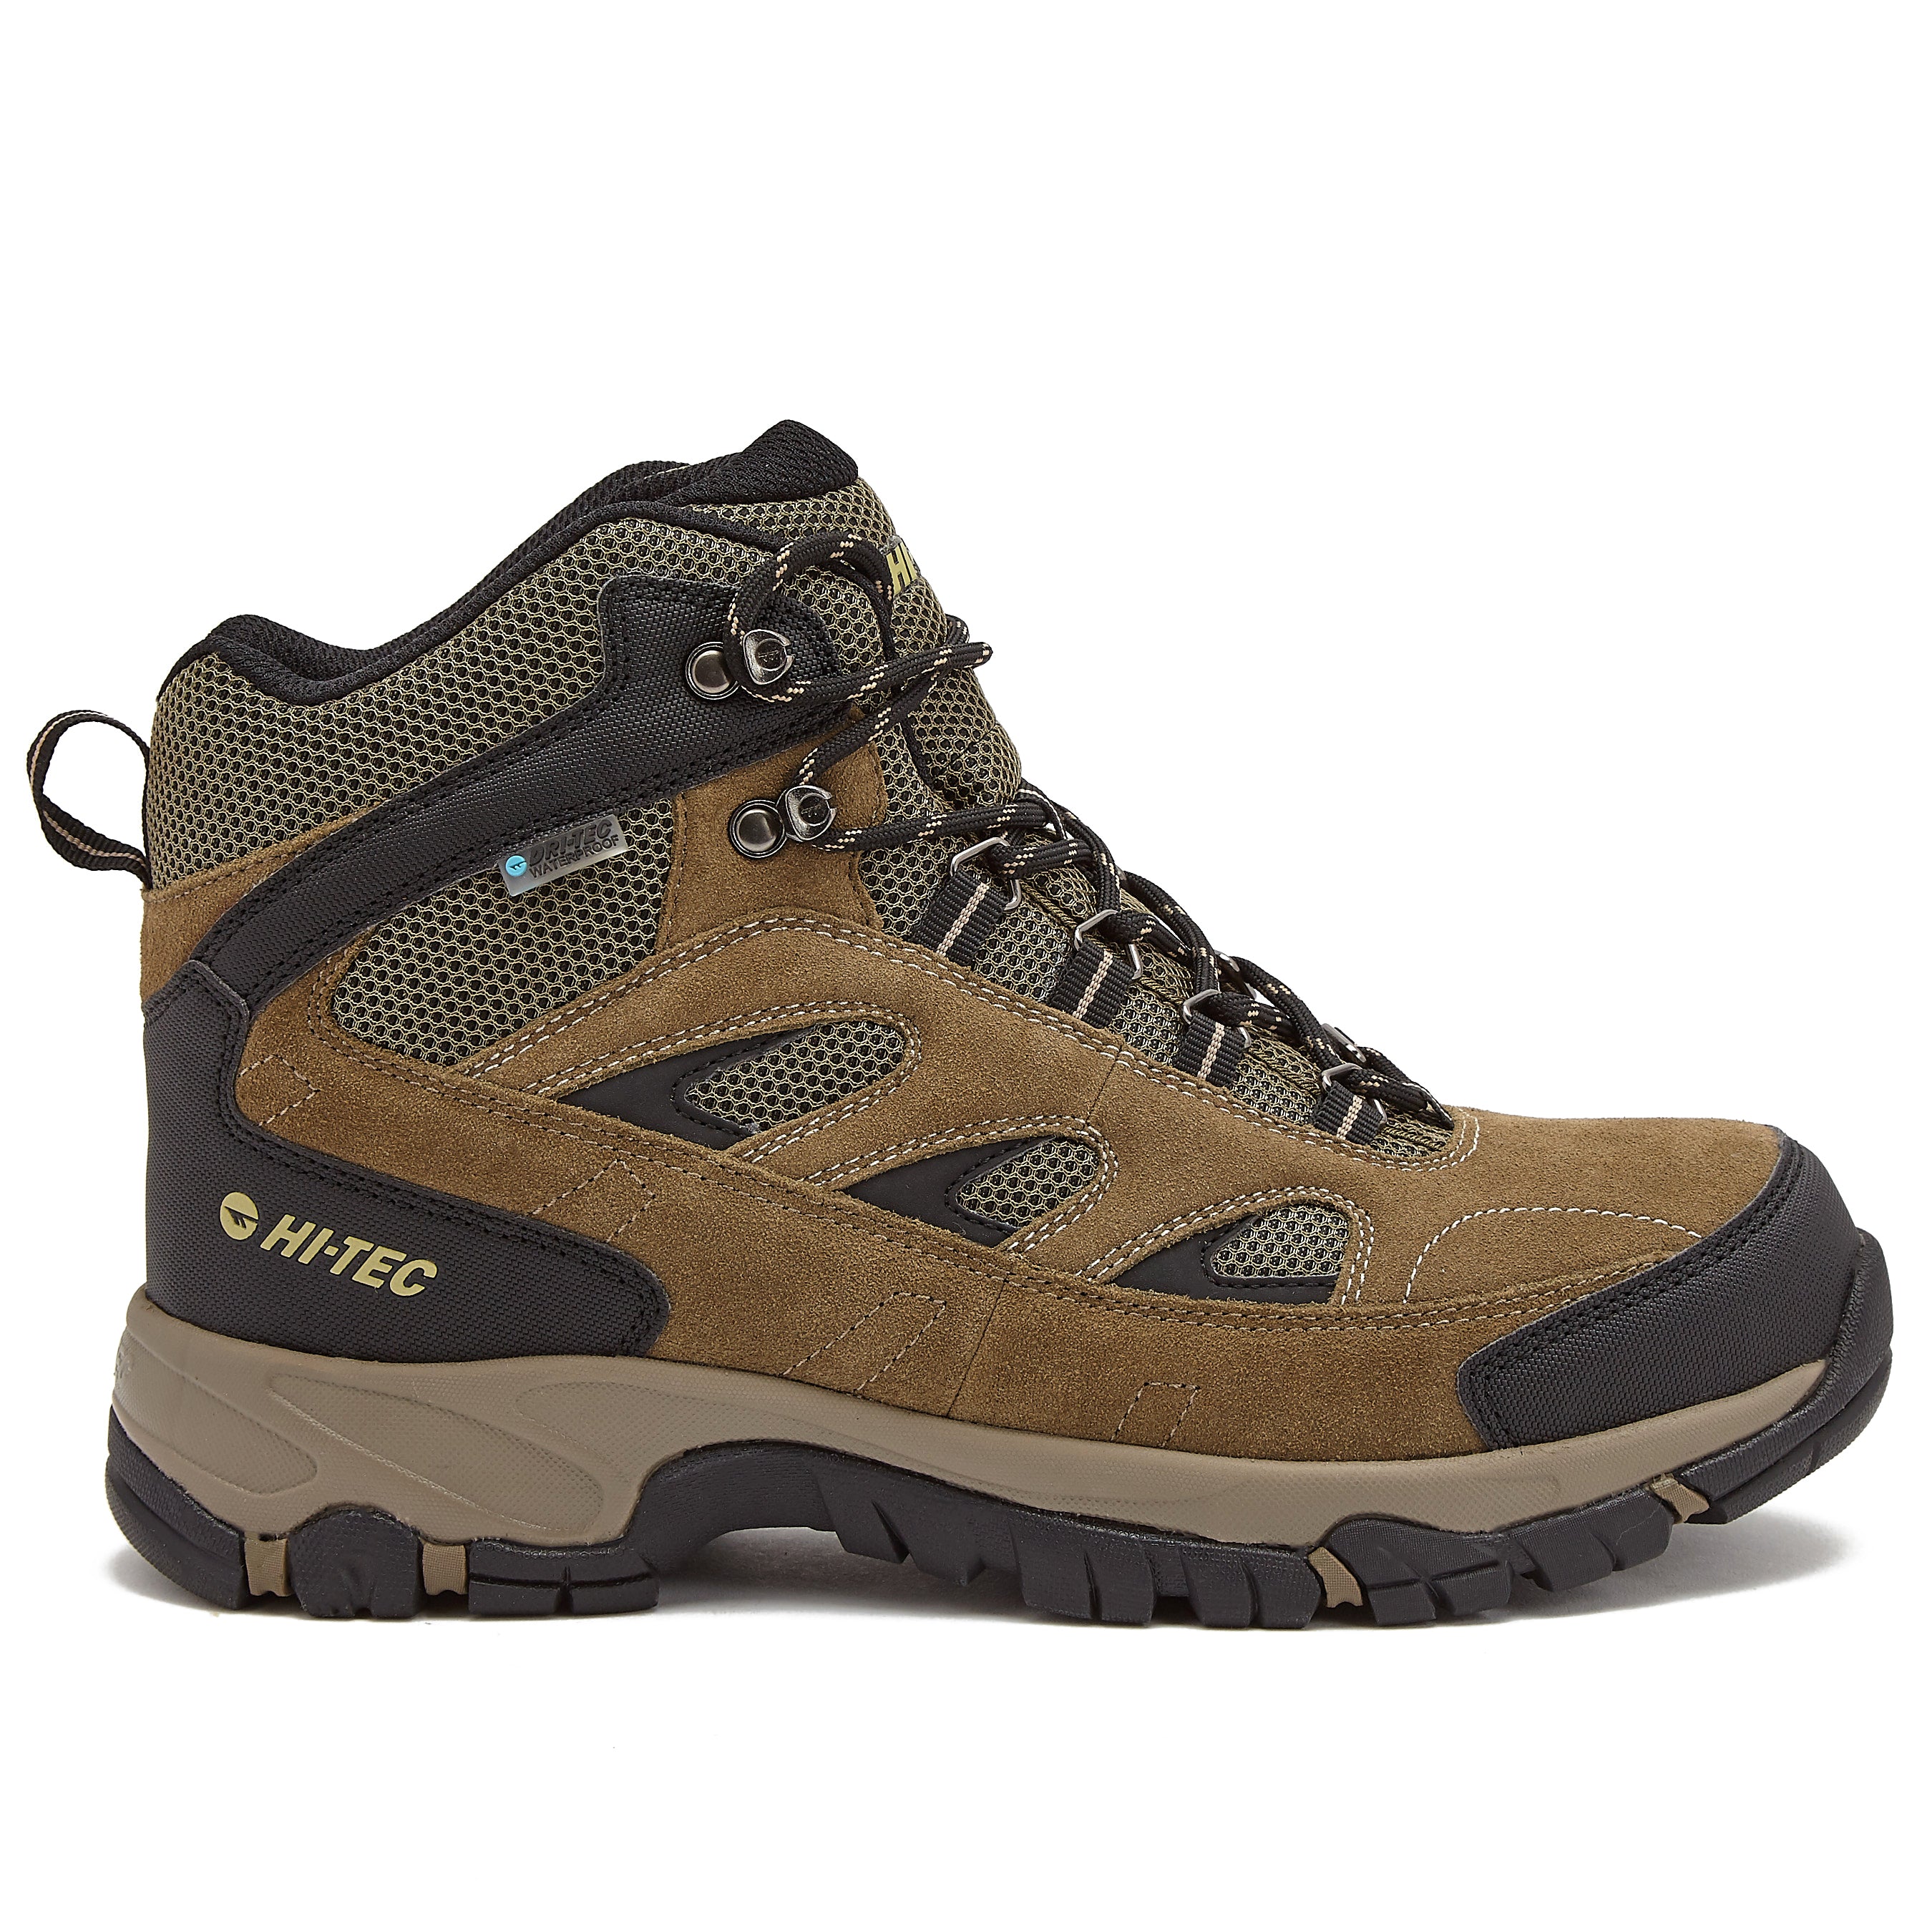 Hi-Tec Hiking Shoes/ Review of Hi Tec Pioneer WP shoes – Curated  Experiences & Impressions!